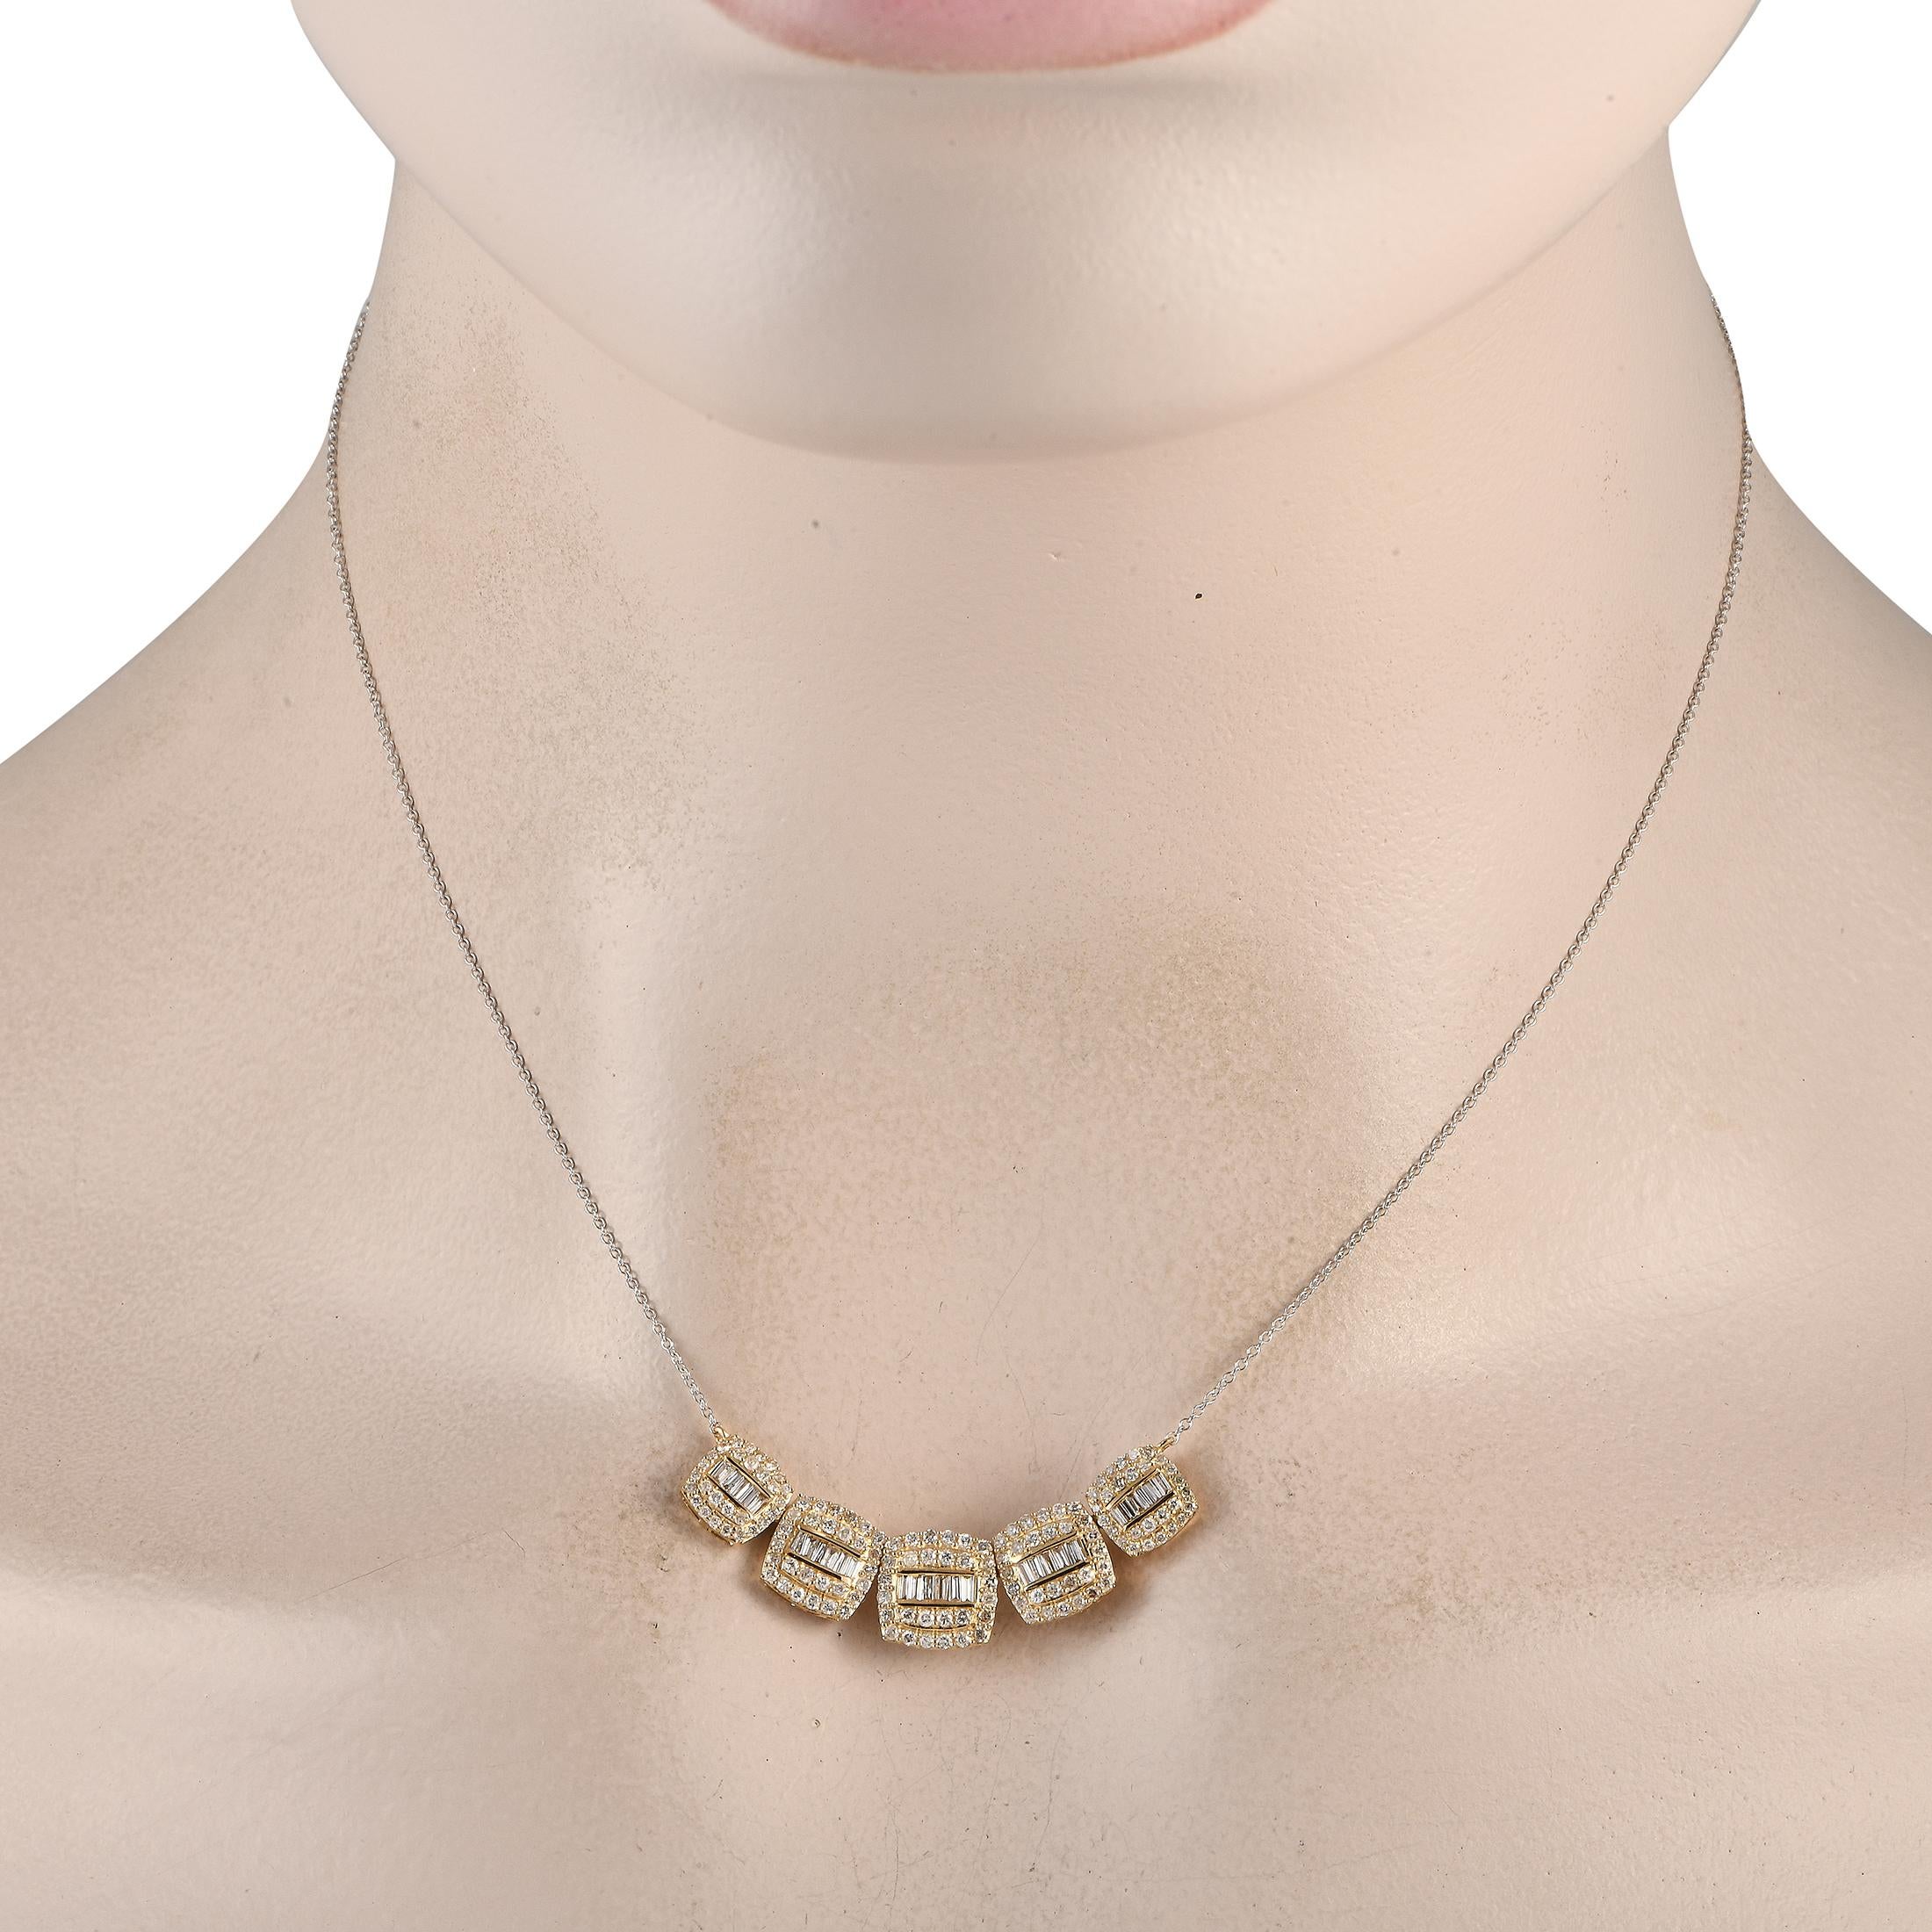 A combination of 14K White Gold and 14K Yellow Gold adds depth and dimension this lovely luxury necklace. Suspended from a 15 chain, youll find a dramatic pendant measuring 0.75 long by 1.5 wide. Diamonds with a total weight of 0.92 carats allow